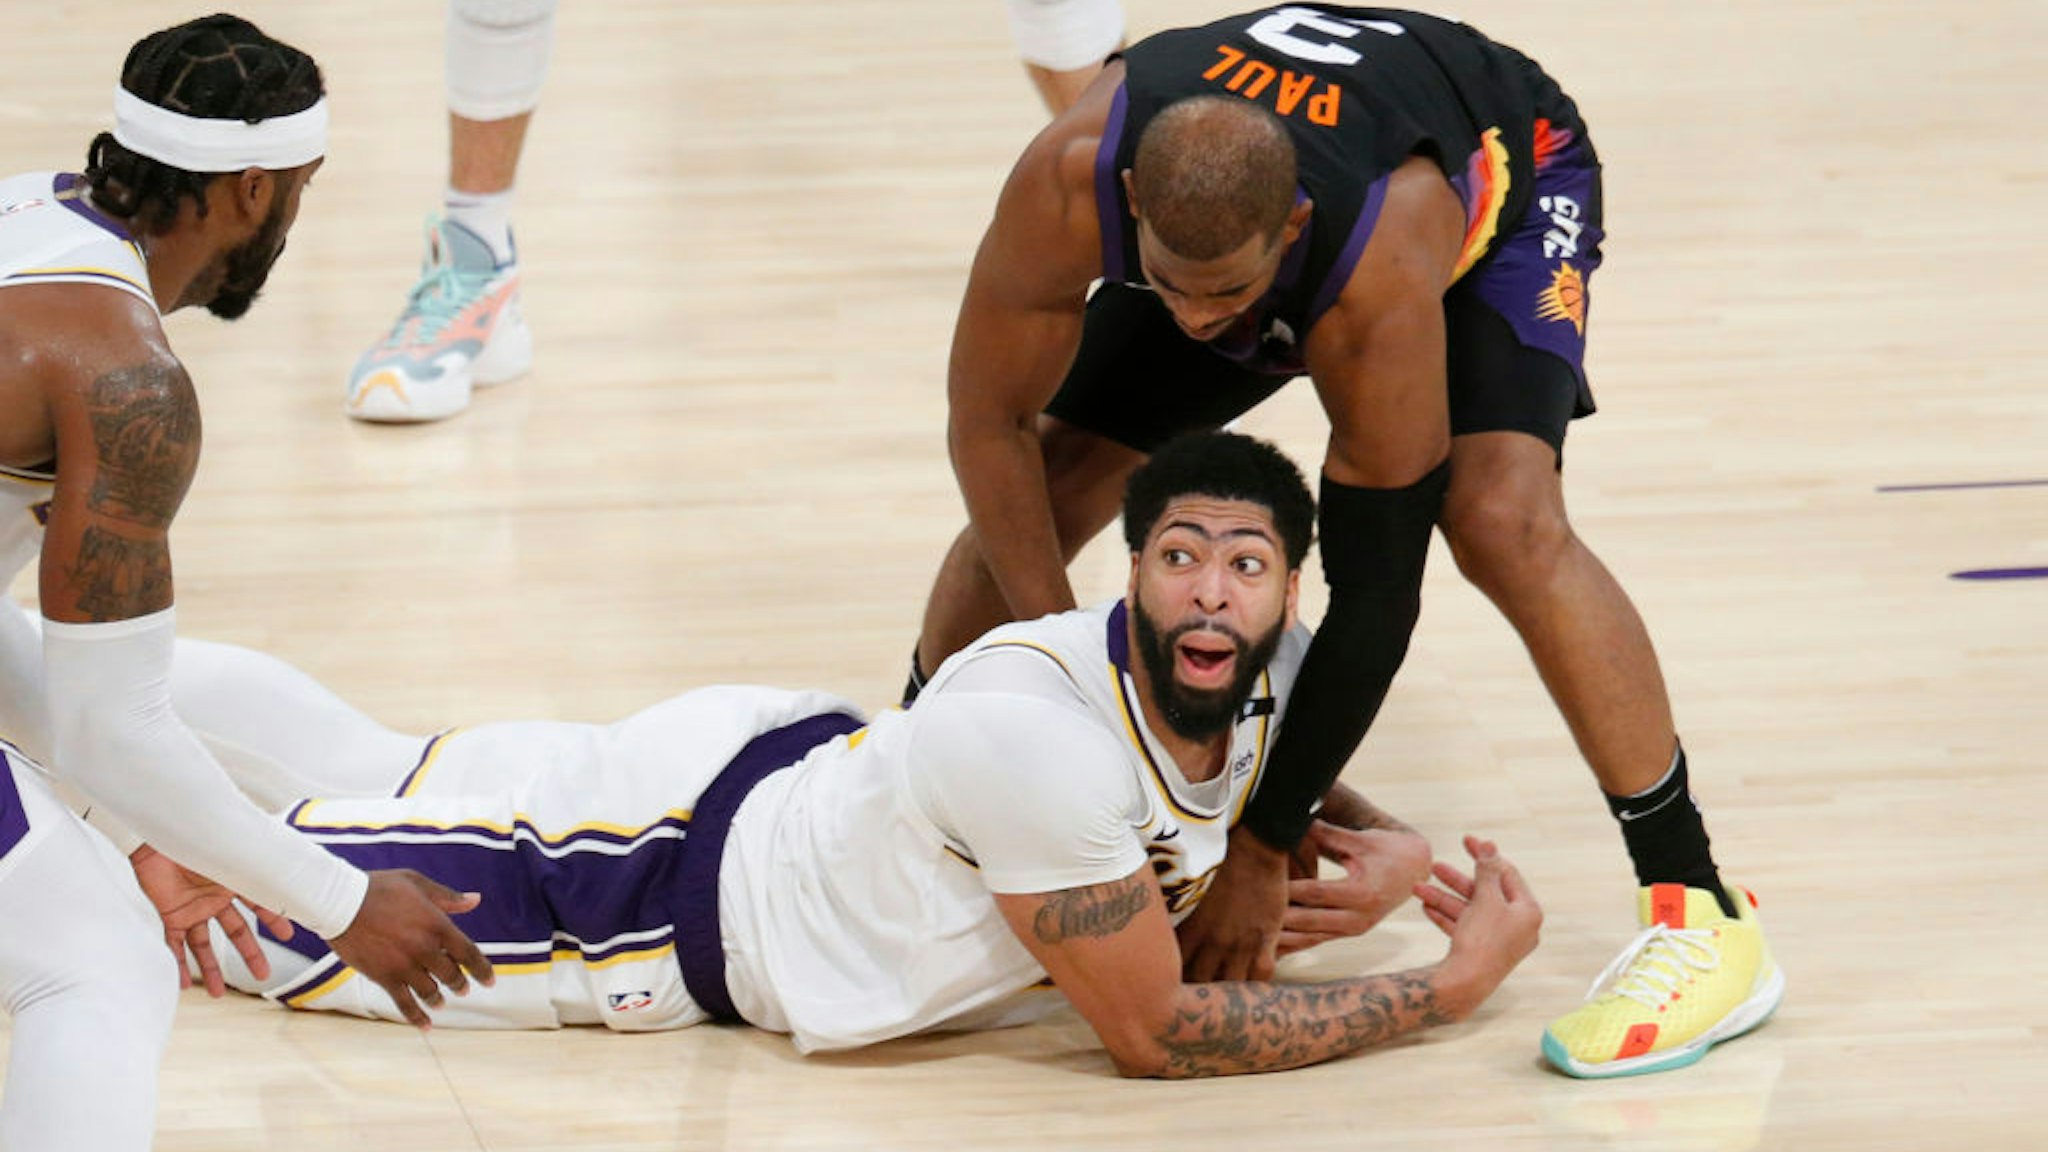 LOS ANGELES, CA - MAY 09: Los Angeles Lakers forward Anthony Davis (3) dives for a loose ball in front ofPhoenix Suns guard Chris Paul (3) Calvin for a time out in the fourth quarter of the Lakers 123-110 win at the Staples Center on Sunday, May 9, 2021 in Los Angeles, CA. (Gary Coronado / Los Angeles Times via Getty Images)